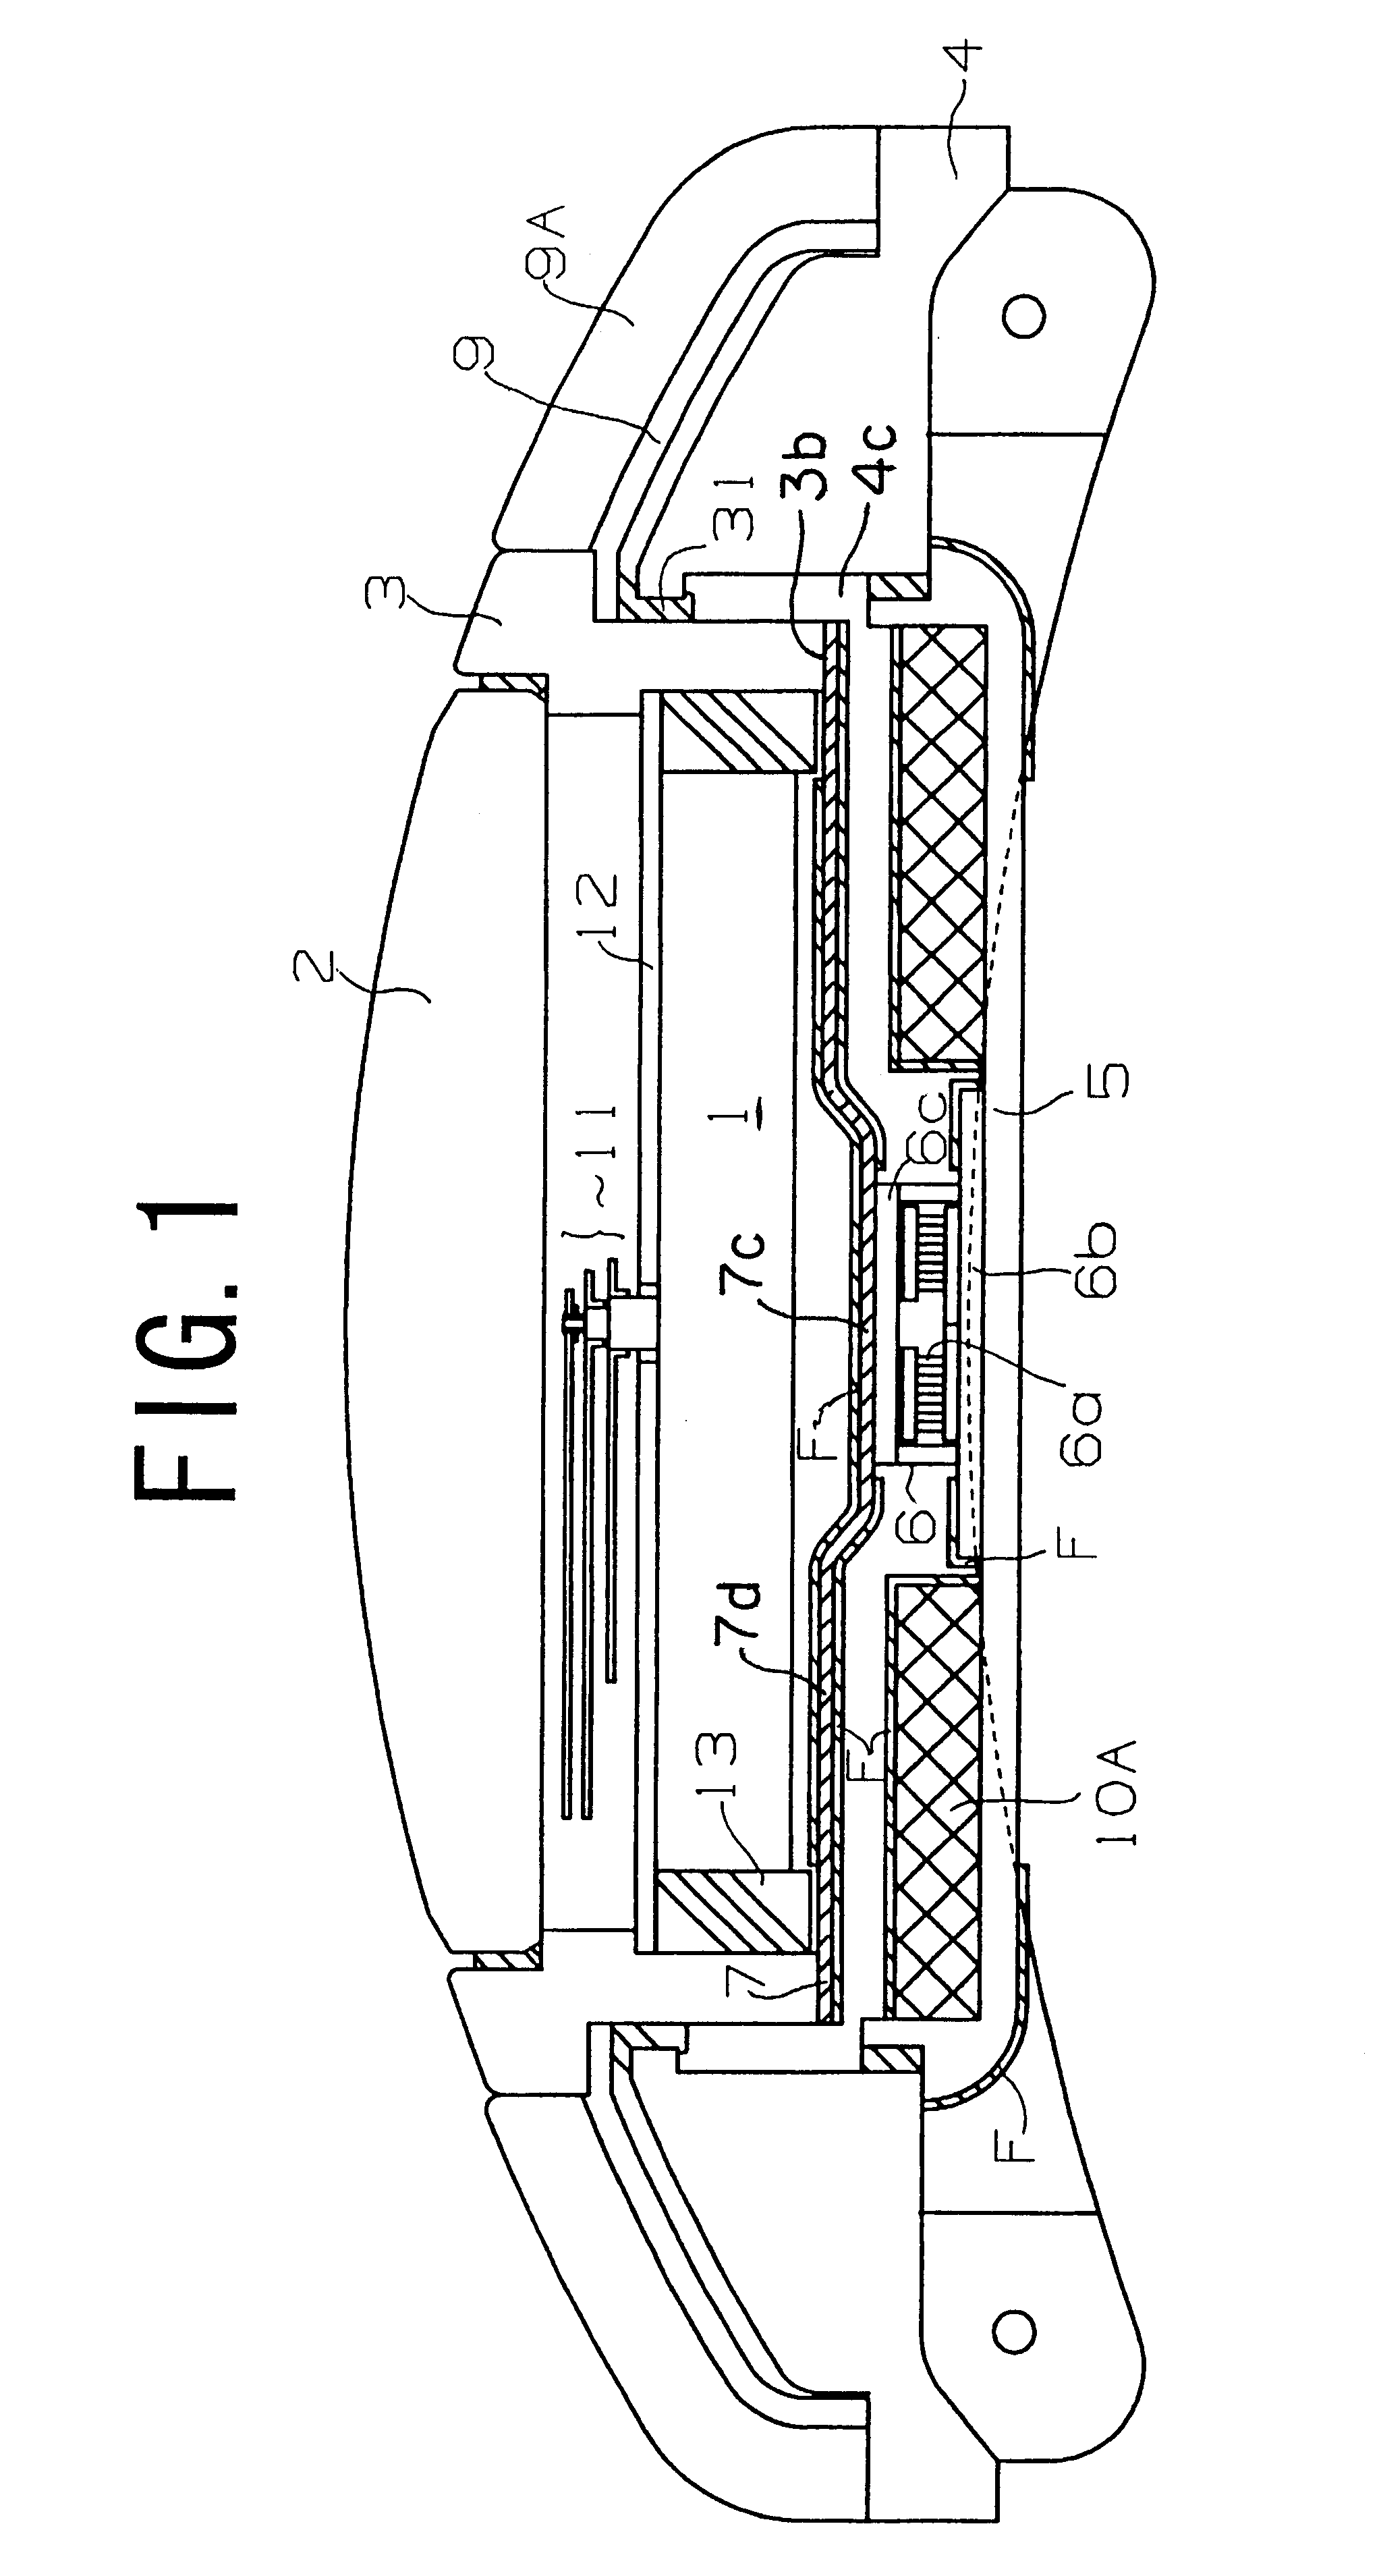 Thermoelectronic generating electronic device